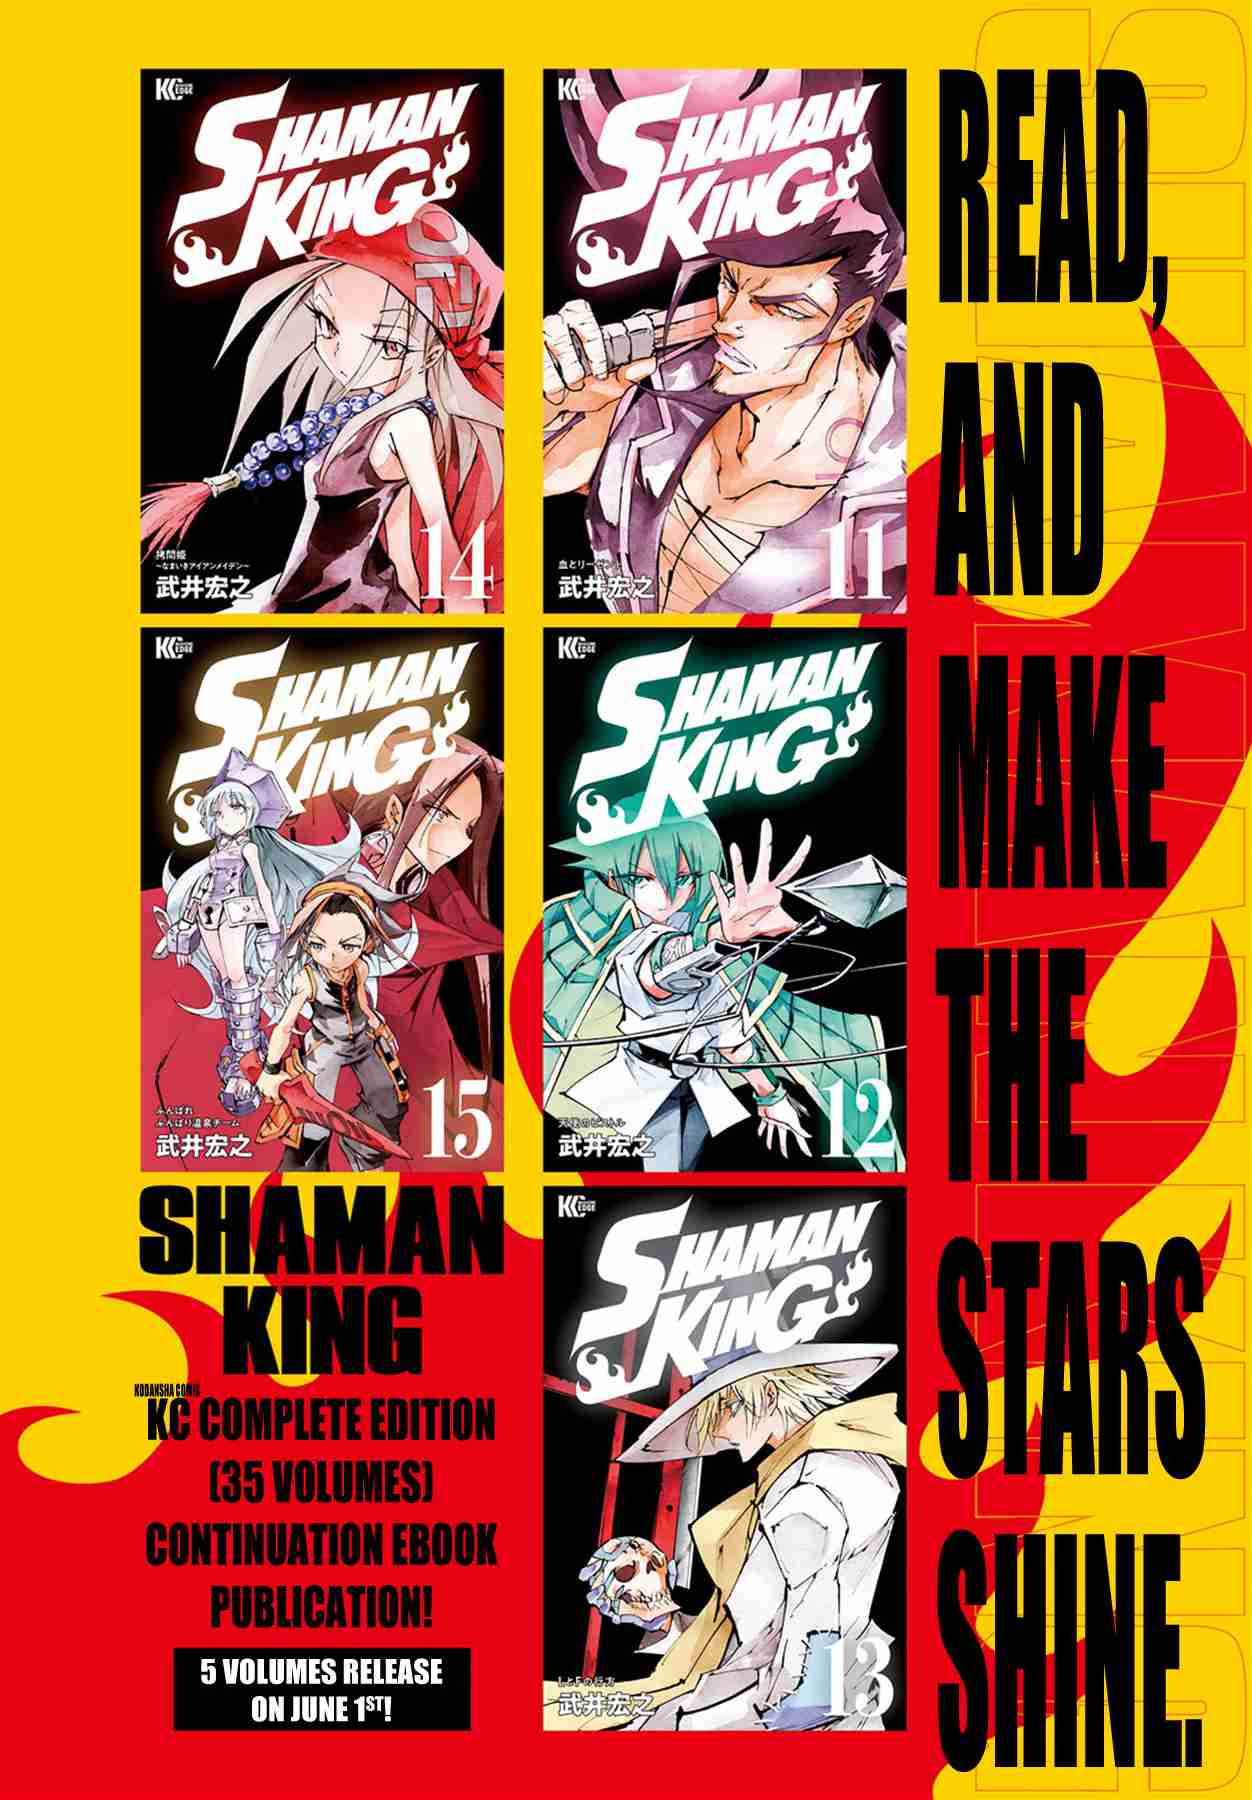 Shaman King: The Super Star Vol. 1 Ch. 1 She came by sidecar!